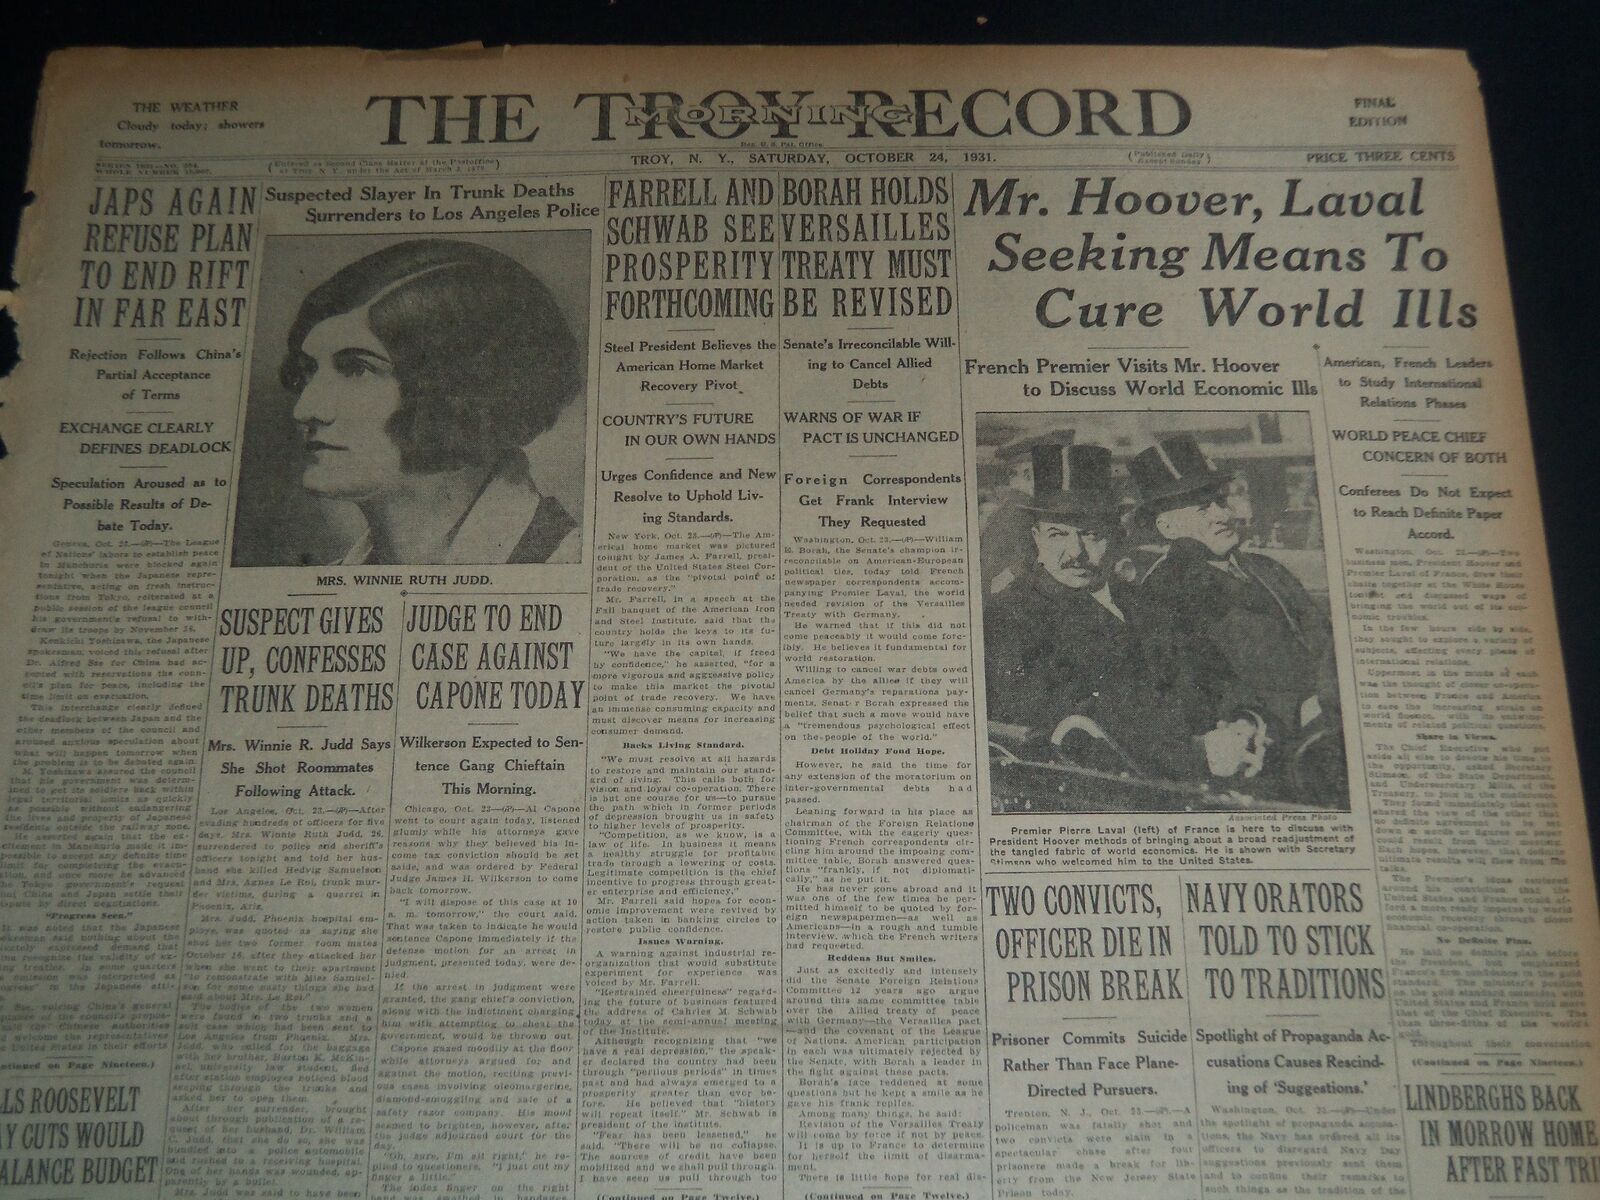 1931 OCTOBER 24 TROY MORNING RECORD - HOOVER-LAVAL SEEKING TO CURE ILLS- NT 7493